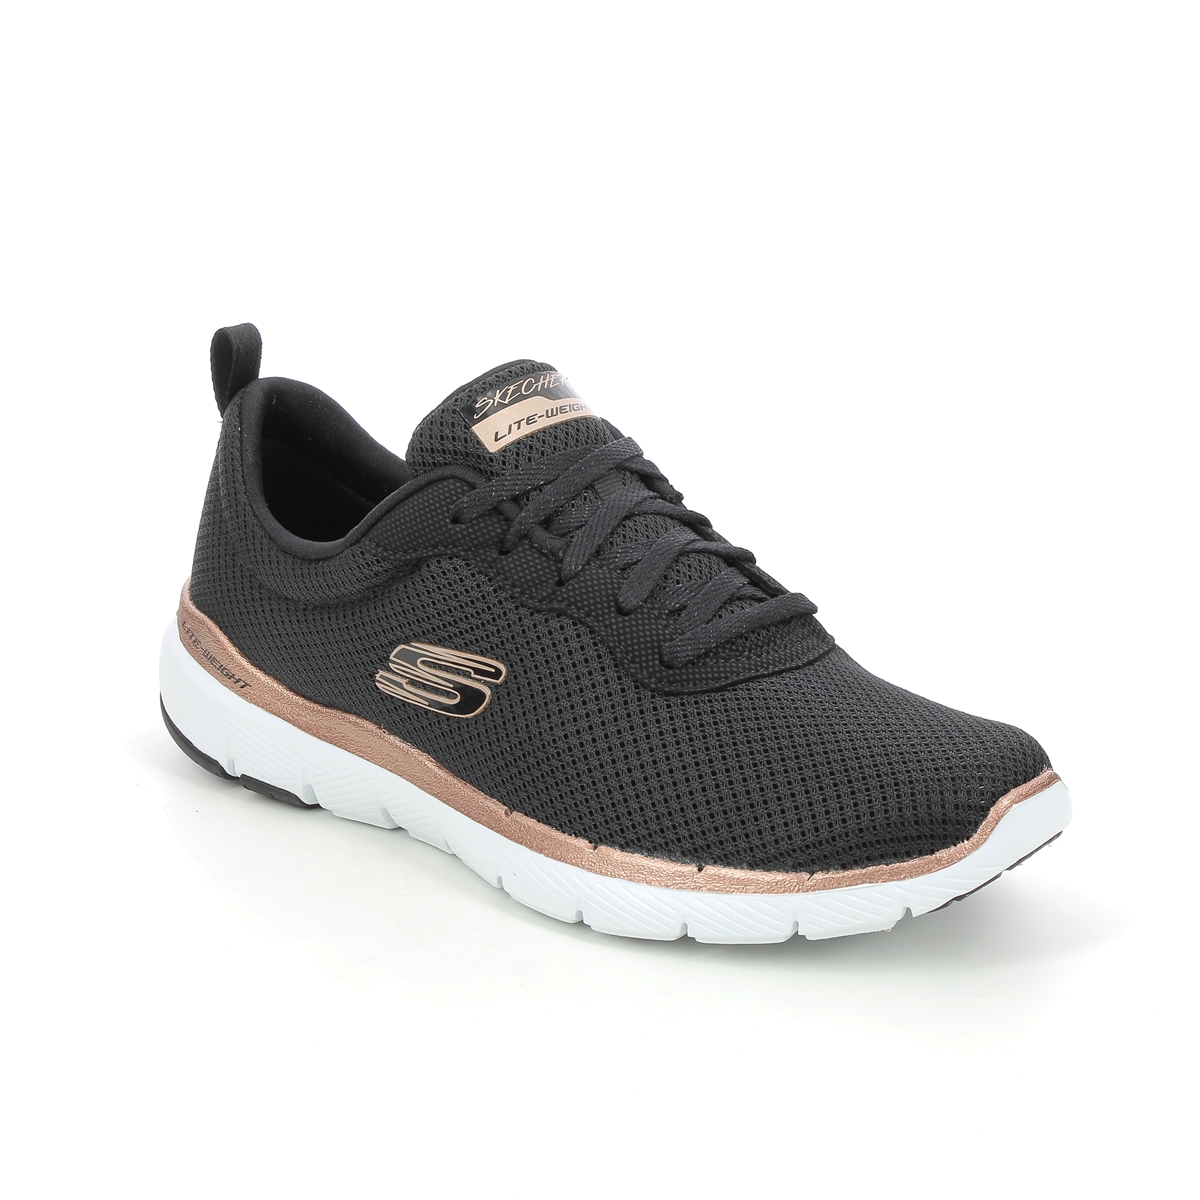 Skechers First Insight Black Rose Gold Womens Trainers 13070 In Size 9 In Plain Black Rose Gold